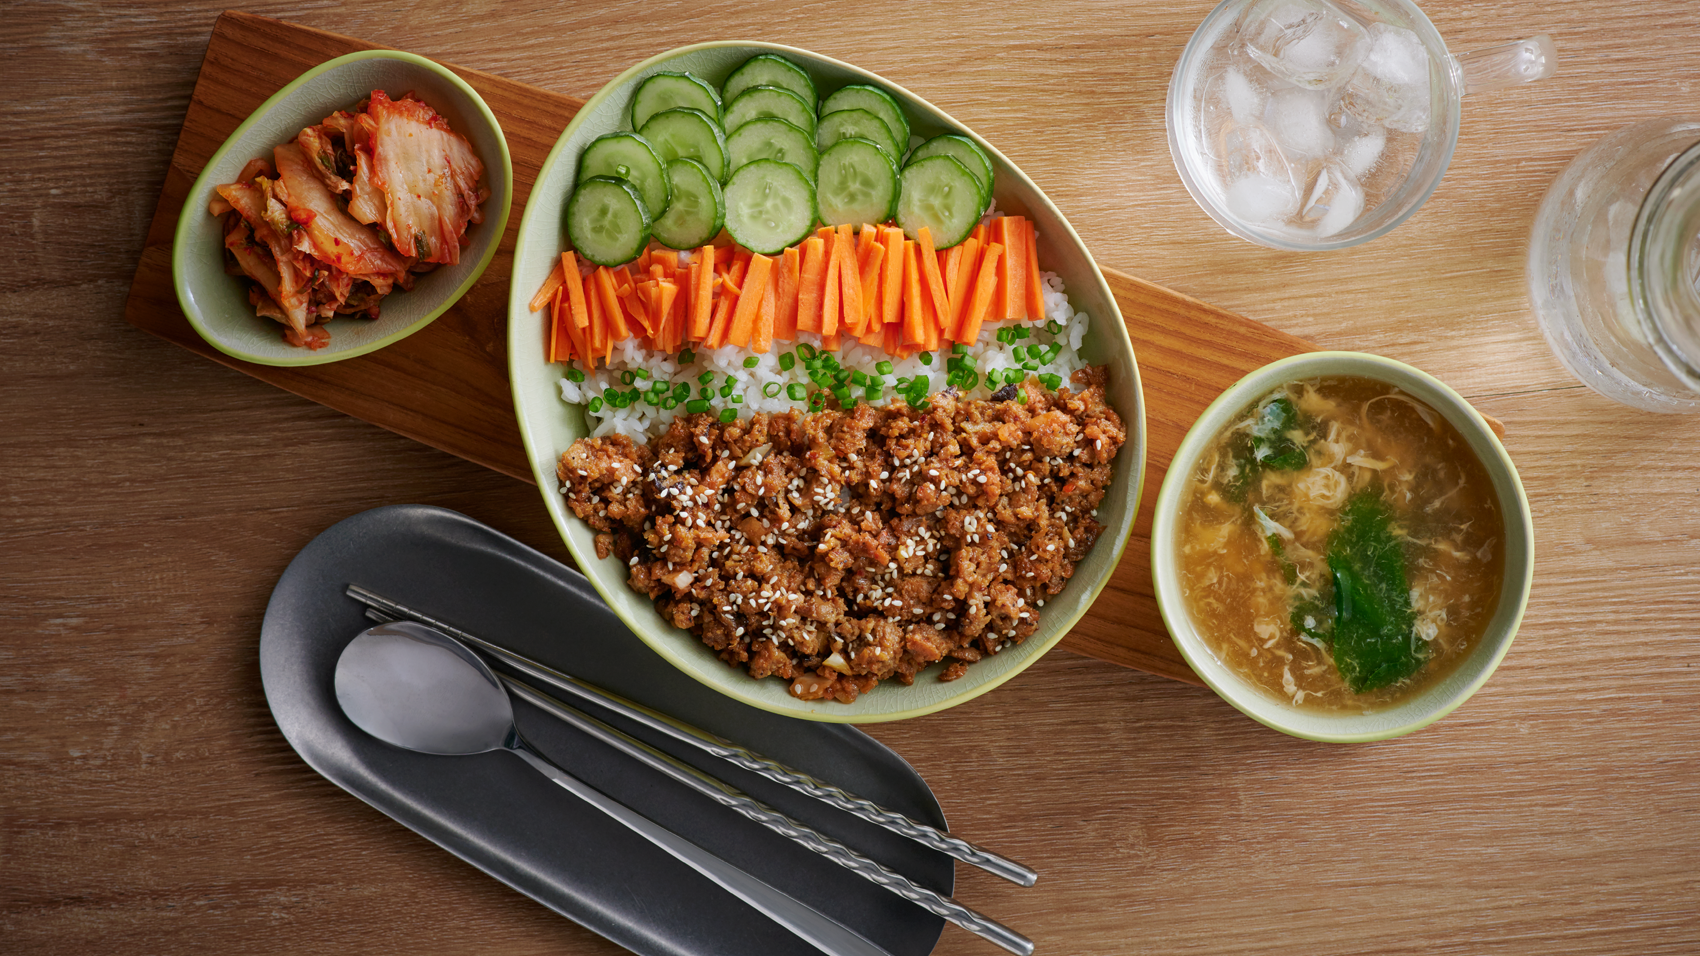 Korean Vegetarian Bowl With yumeat™ Plant-Based Minced Meat